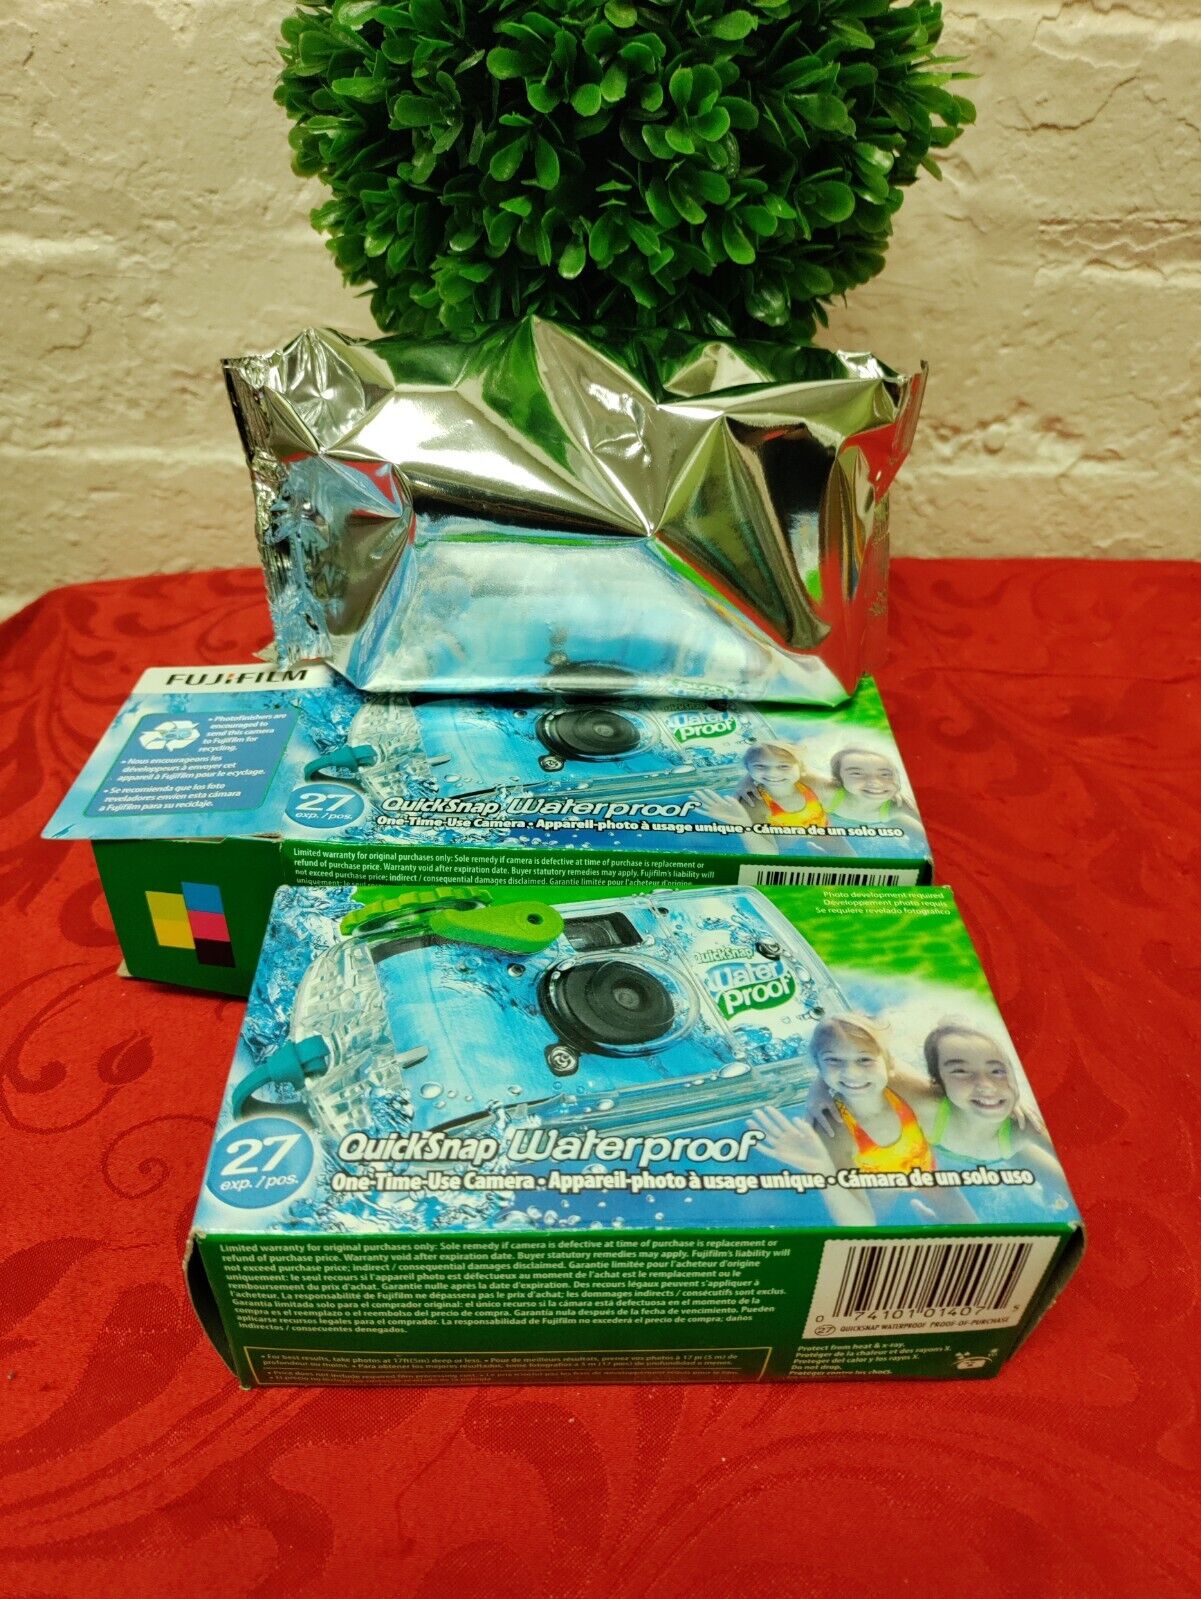 2 Quick Snap Waterproof Fujifilm Disposable Camera New One Is Open But New